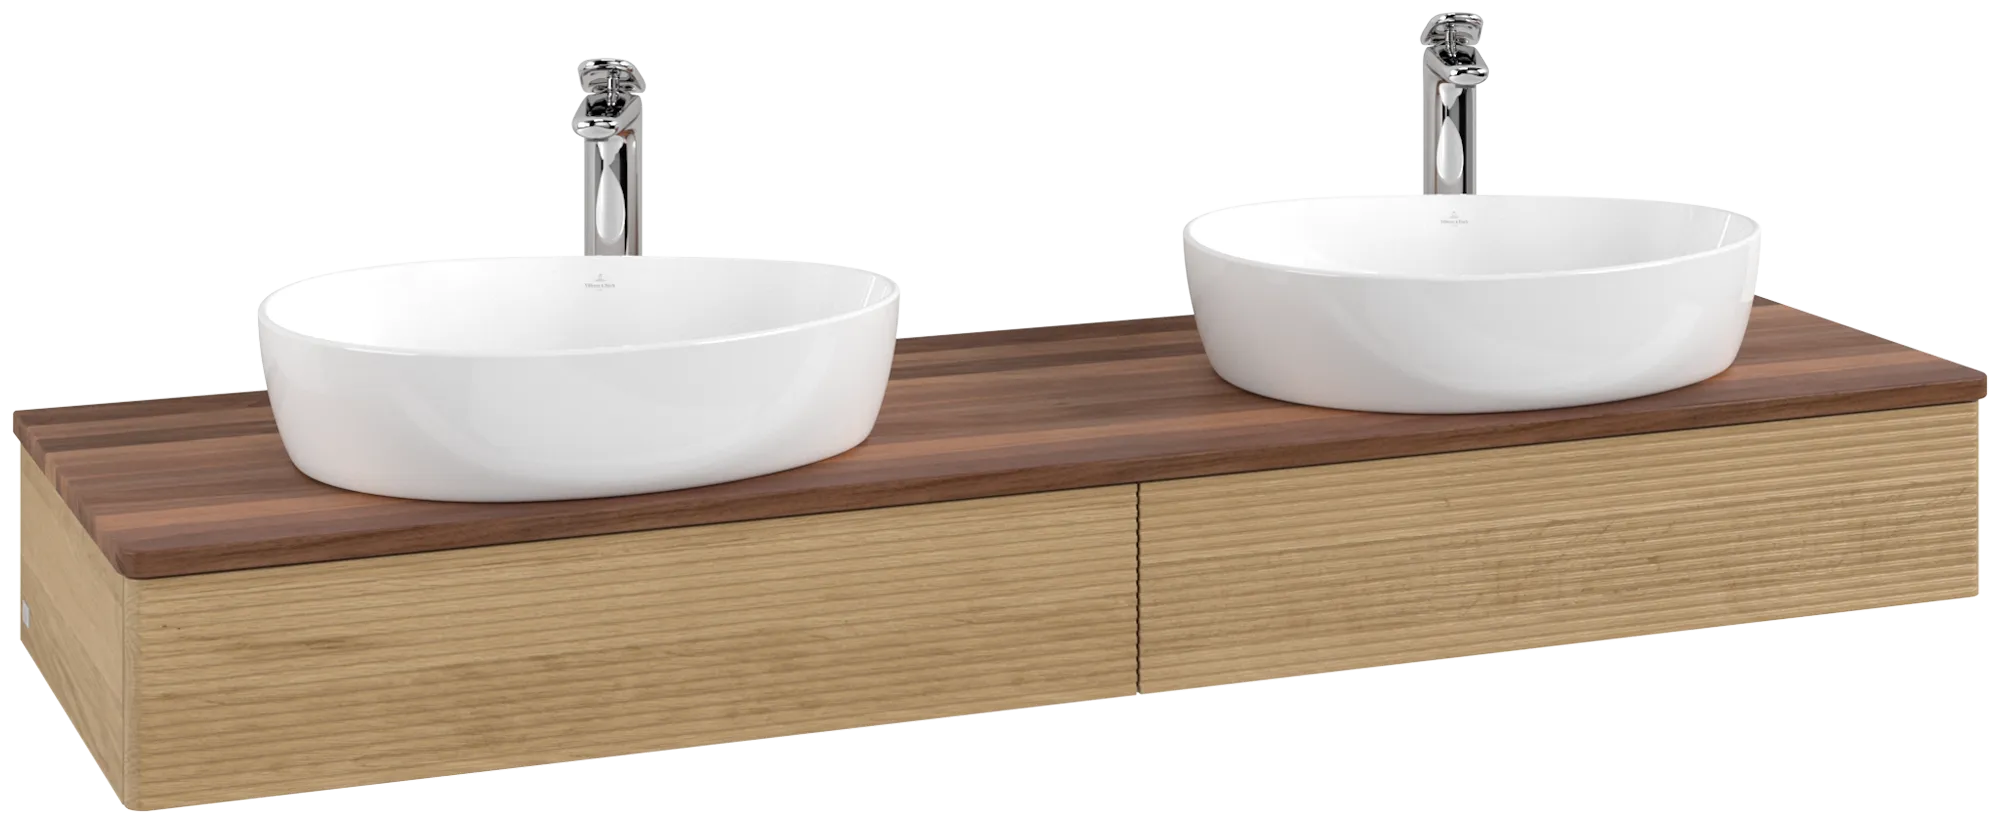 Picture of VILLEROY BOCH Antao Vanity unit, with lighting, 2 pull-out compartments, 1600 x 190 x 500 mm, Front with grain texture, Honey Oak / Warm Walnut #L17152HN